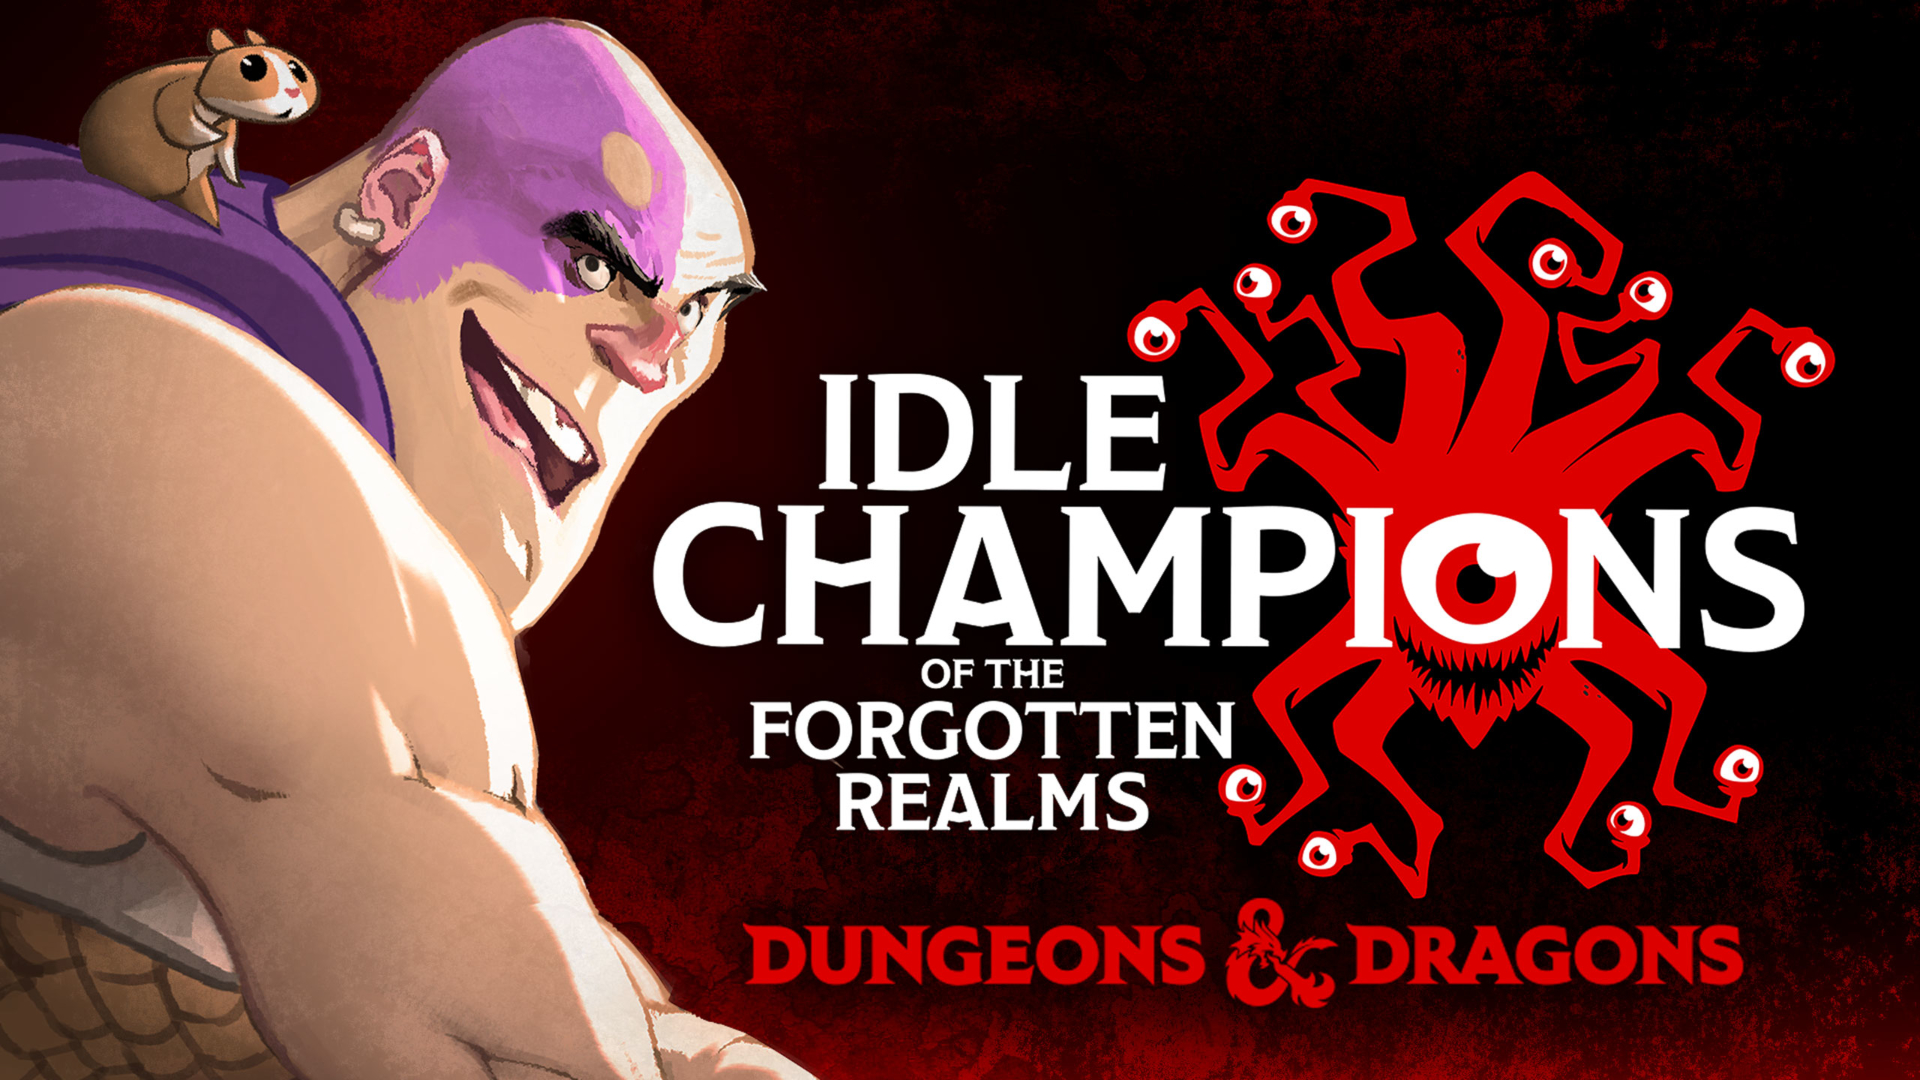 video game, idle champions of the forgotten realms wallpaper for mobile